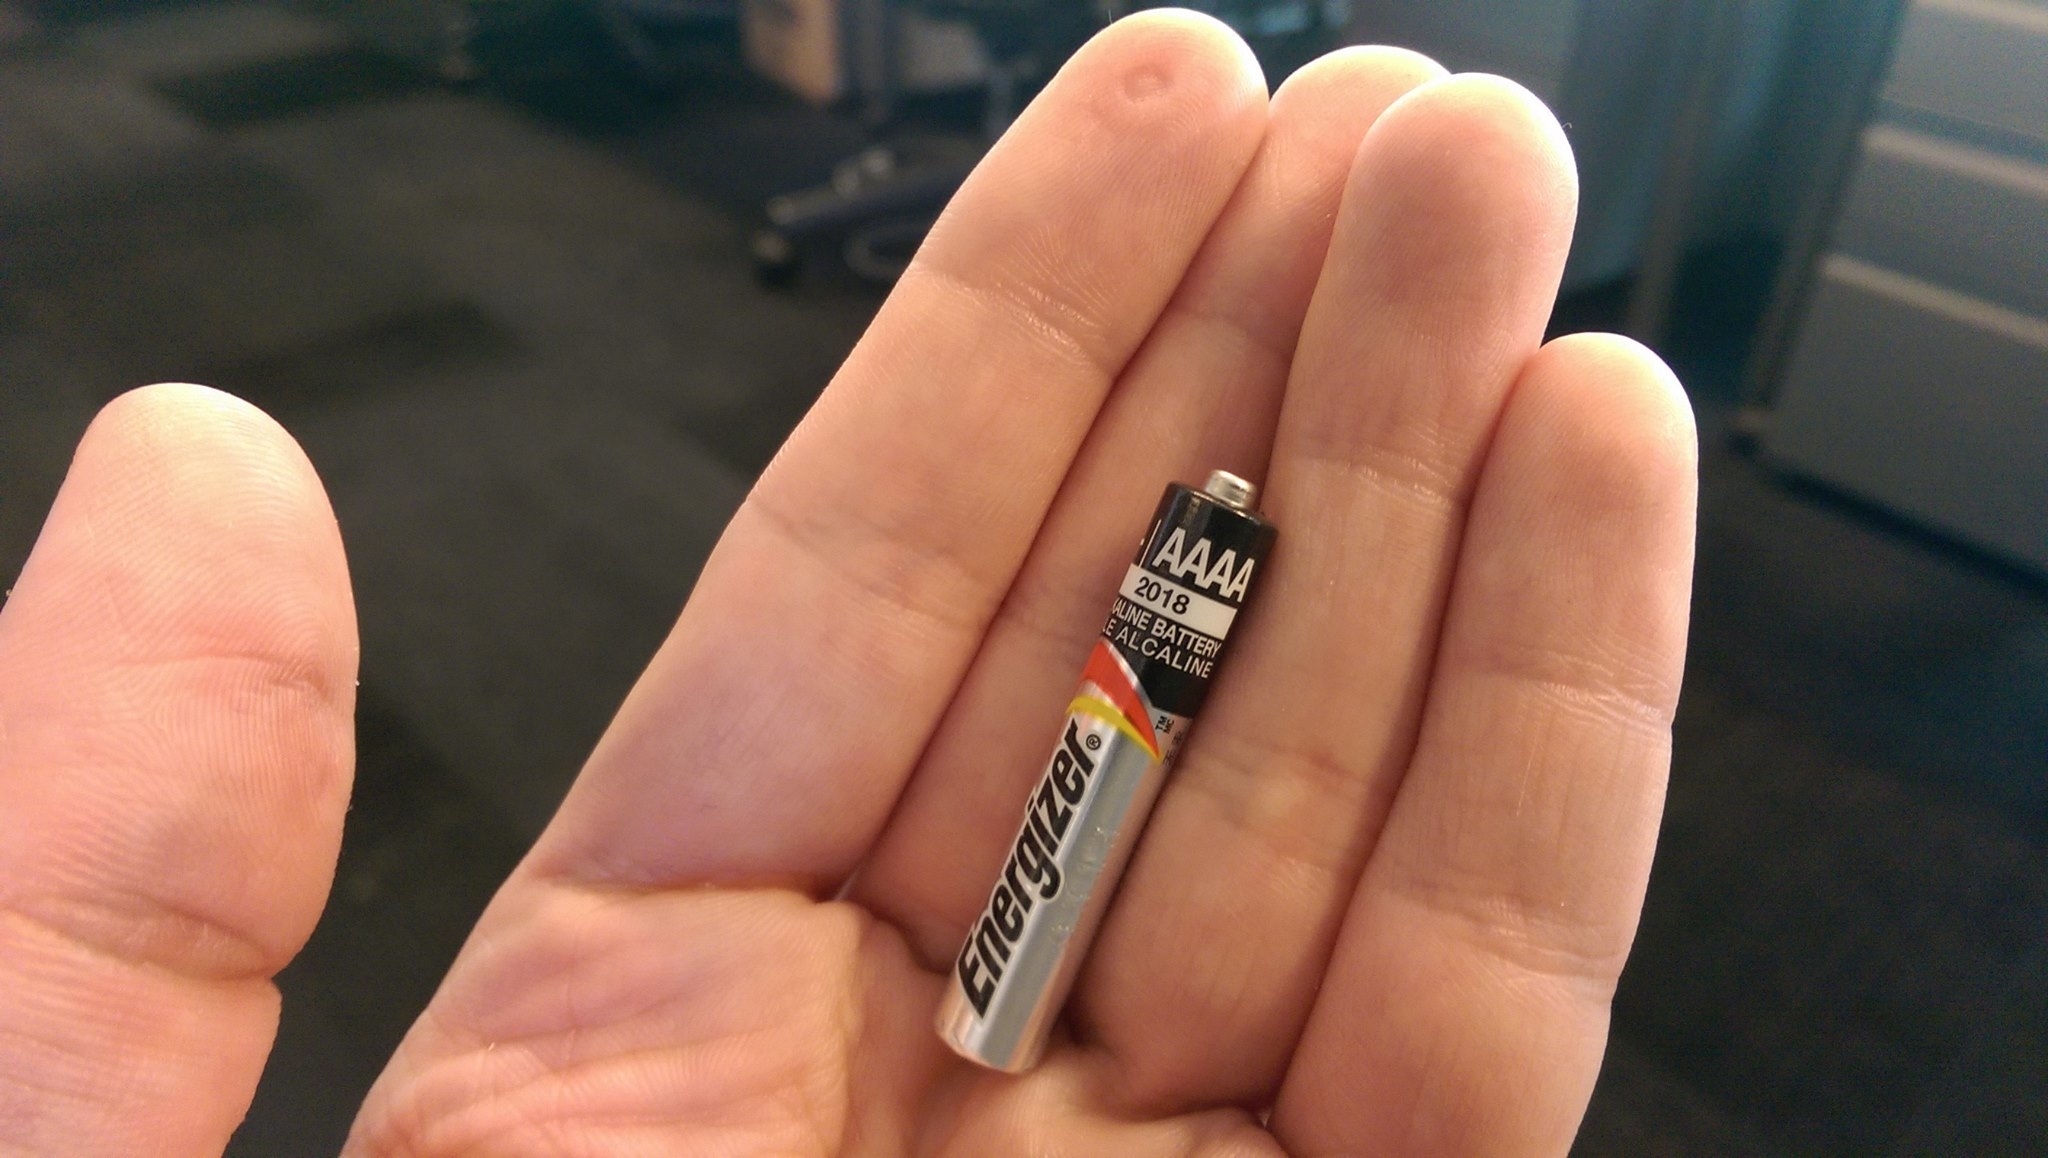 Person&#x27;s hand holding a small AAAA Energizer battery to show its size compared to fingers